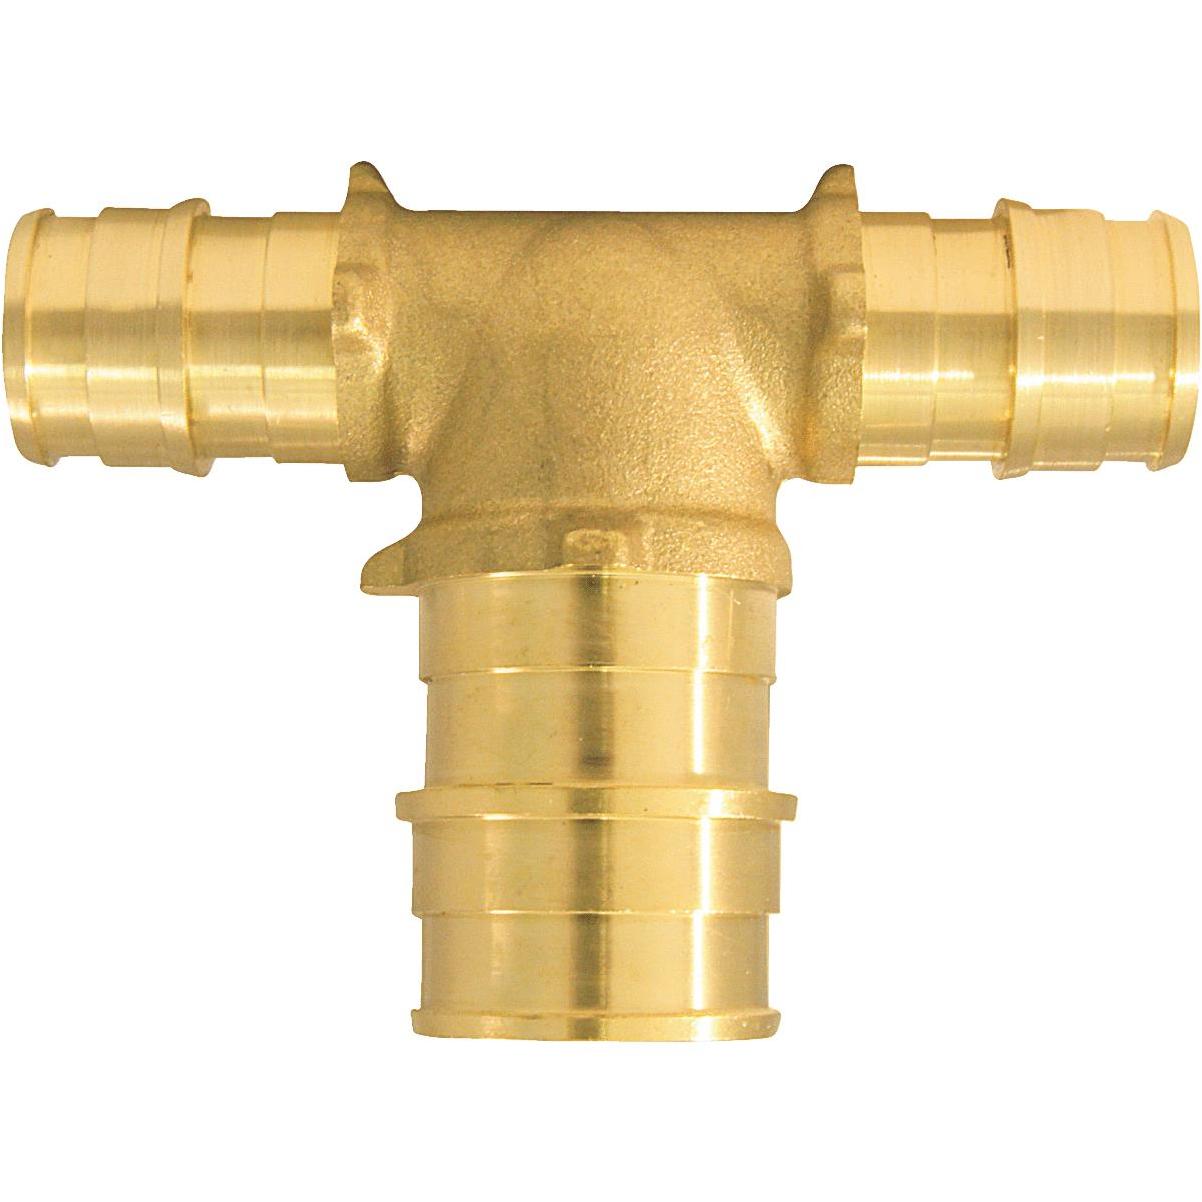 UPONOR 1'' x 3/4'' x 3/4'' ProPEX Reducing Tee Lead Free Brass 